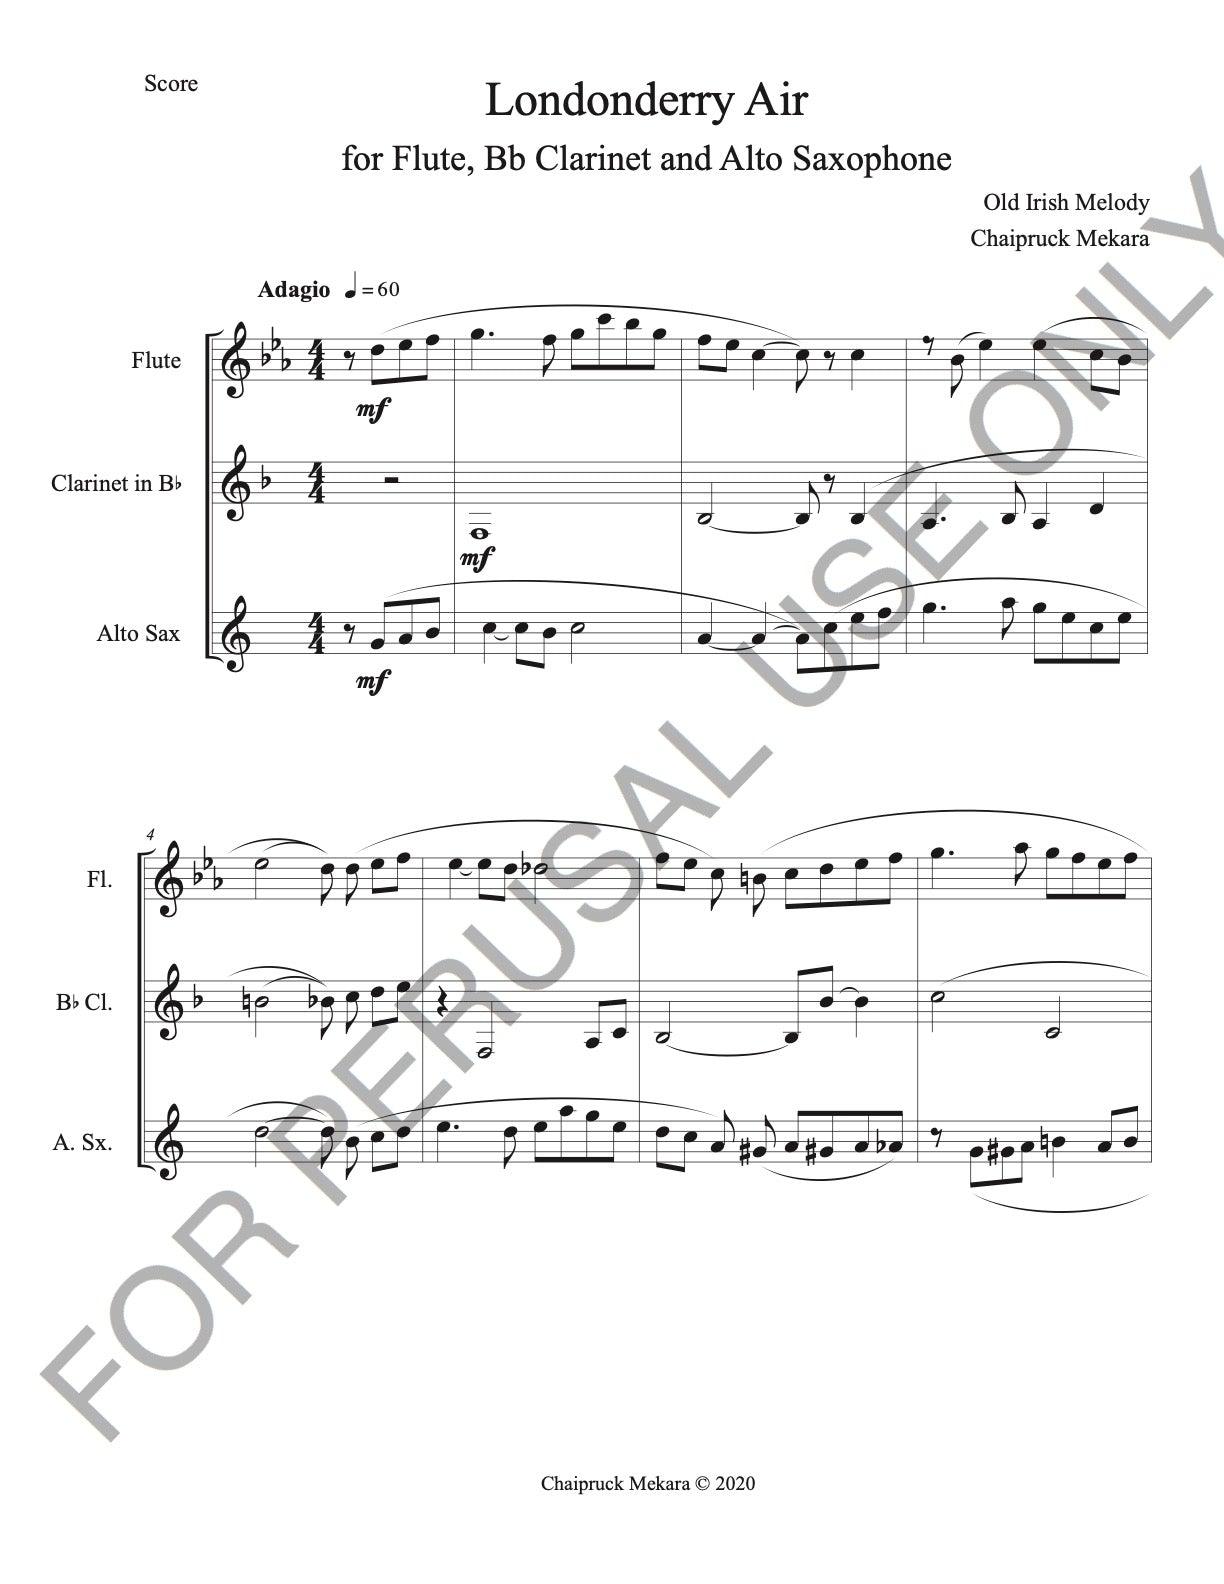 Londonderry Air for Flute, BbClarinet and Alto Saxophone (score+parts) - ChaipruckMekara